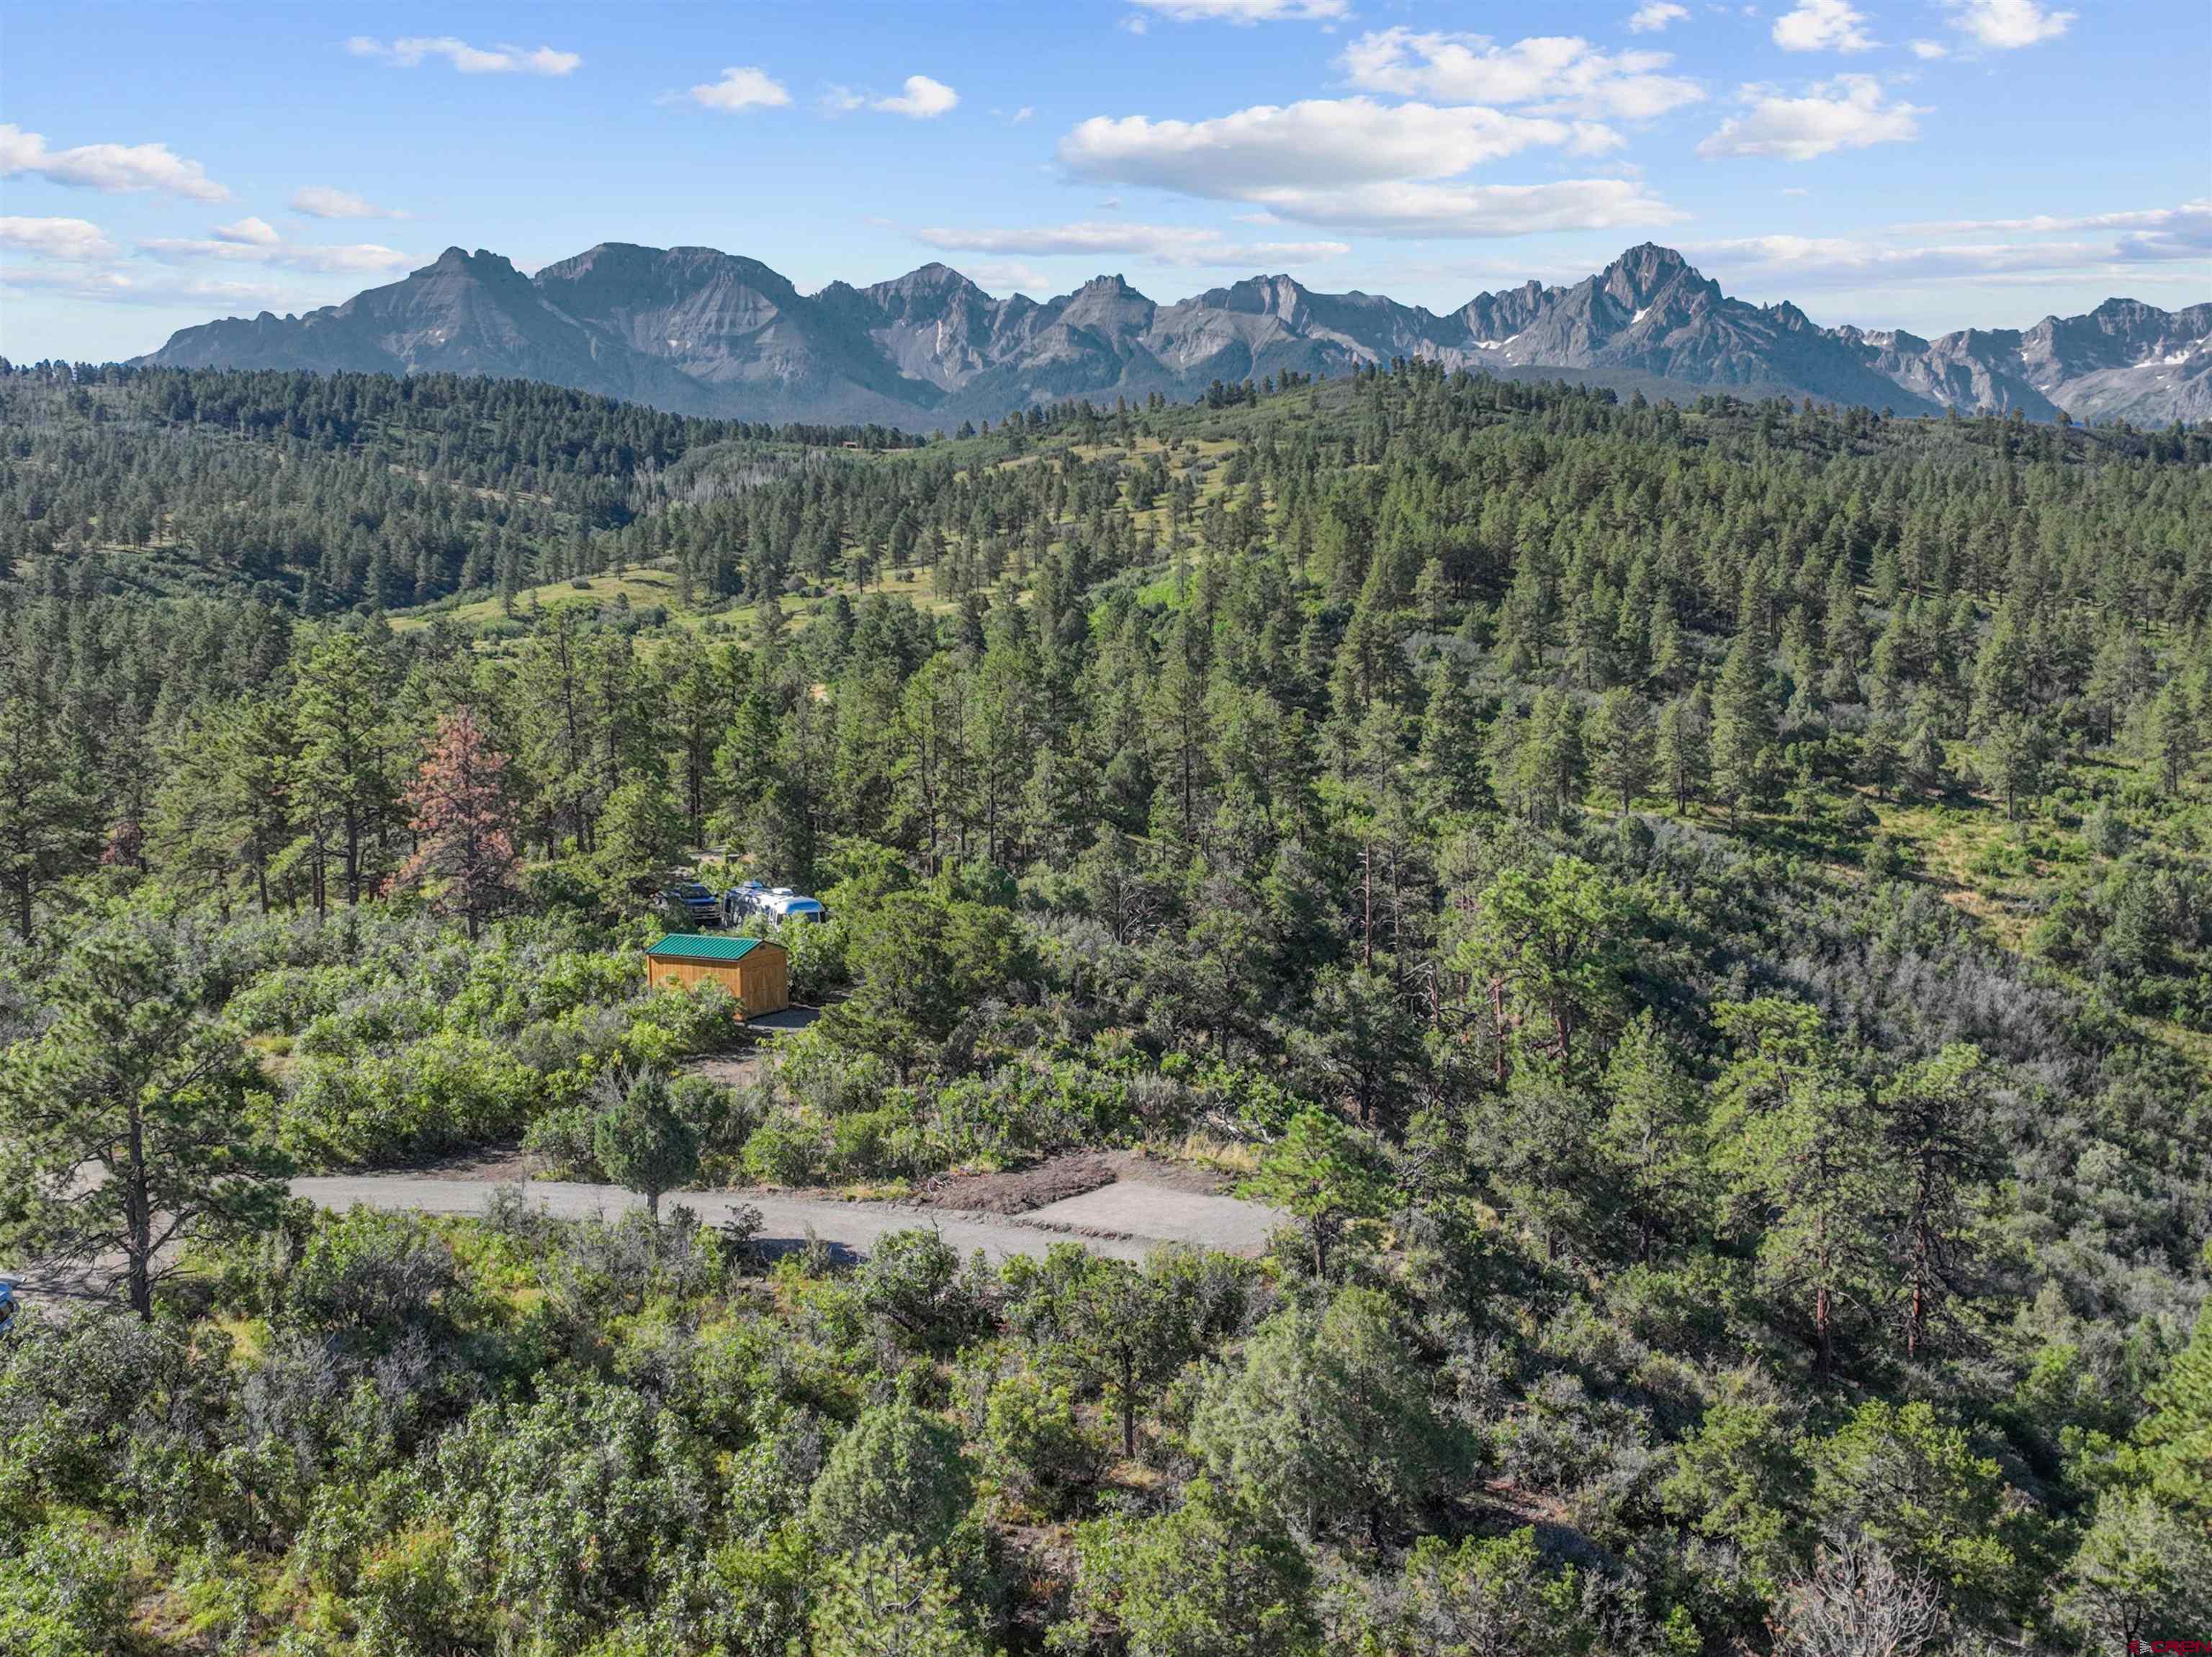 The opportunity to own one of the few 35-acre parcels in High Noon Ranch just south of Ridgway does not come along very often. Standing on the property while gazing across dense ponderosa pine forest at unobstructed views of the Sneffels and Cimarron mountain ranges, it is easy to understand why. Situated atop the low density and highly desirable Miller Mesa, you'll find yourself immersed in the remote Colorado mountain dream while being only 5 minutes from town. The build site includes a recently cleared hillside driveway and adjacent 400sf patio area with incredible views that could be used as part of your future home or as a separate spot for an RV, tiny home, or carriage house. Electric and well are already in place, including a 50amp power pedestal currently in service, as well as a topographical survey and the results of a soil test. All the legwork has been done so you can begin designing and building your dream mountain home immediately. A natural spring lower on the property contributes to the abundance of wildlife that passes through the area. Strong cell service and Starlink internet makes staying in touch and working remotely a breeze despite the rustic setting. Come imagine sitting on your deck and watching the alpenglow light up Mt. Sneffels at sunset without a single manmade structure in the foreground before fading to allow the Milky Way and shooting stars to take center stage.